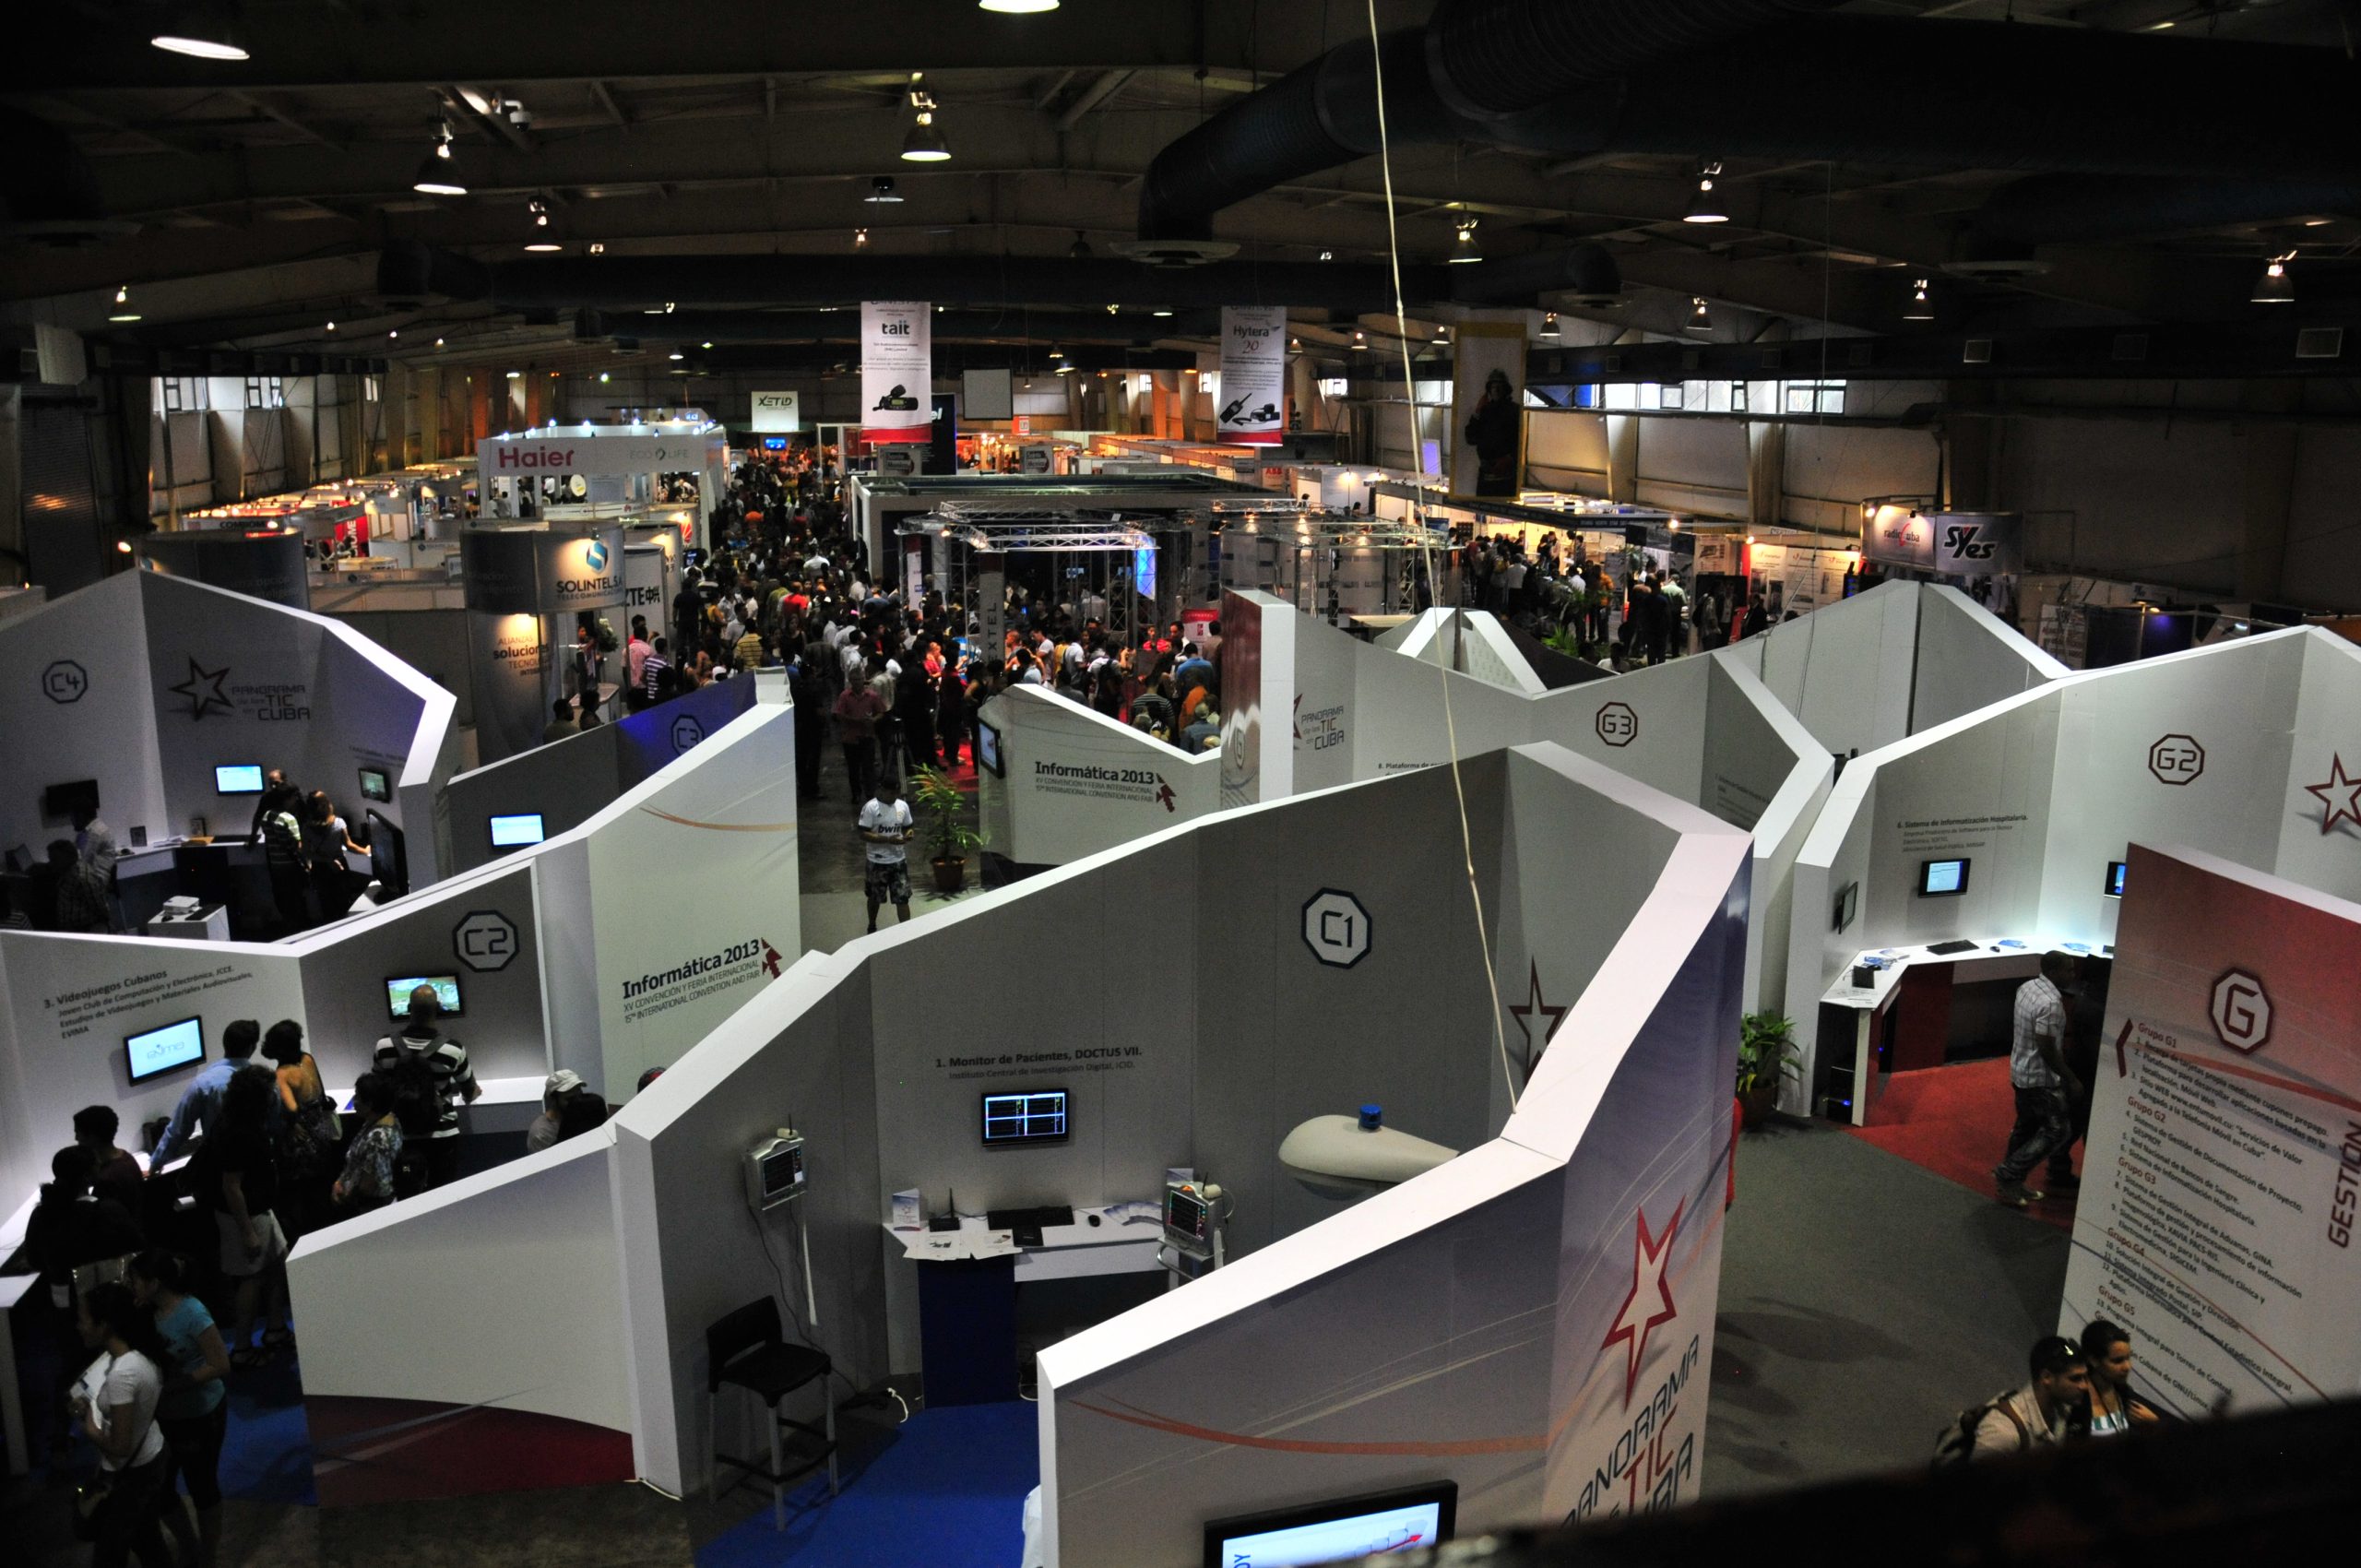 2013 A view of one of the halls of the Exhibitory Fair 